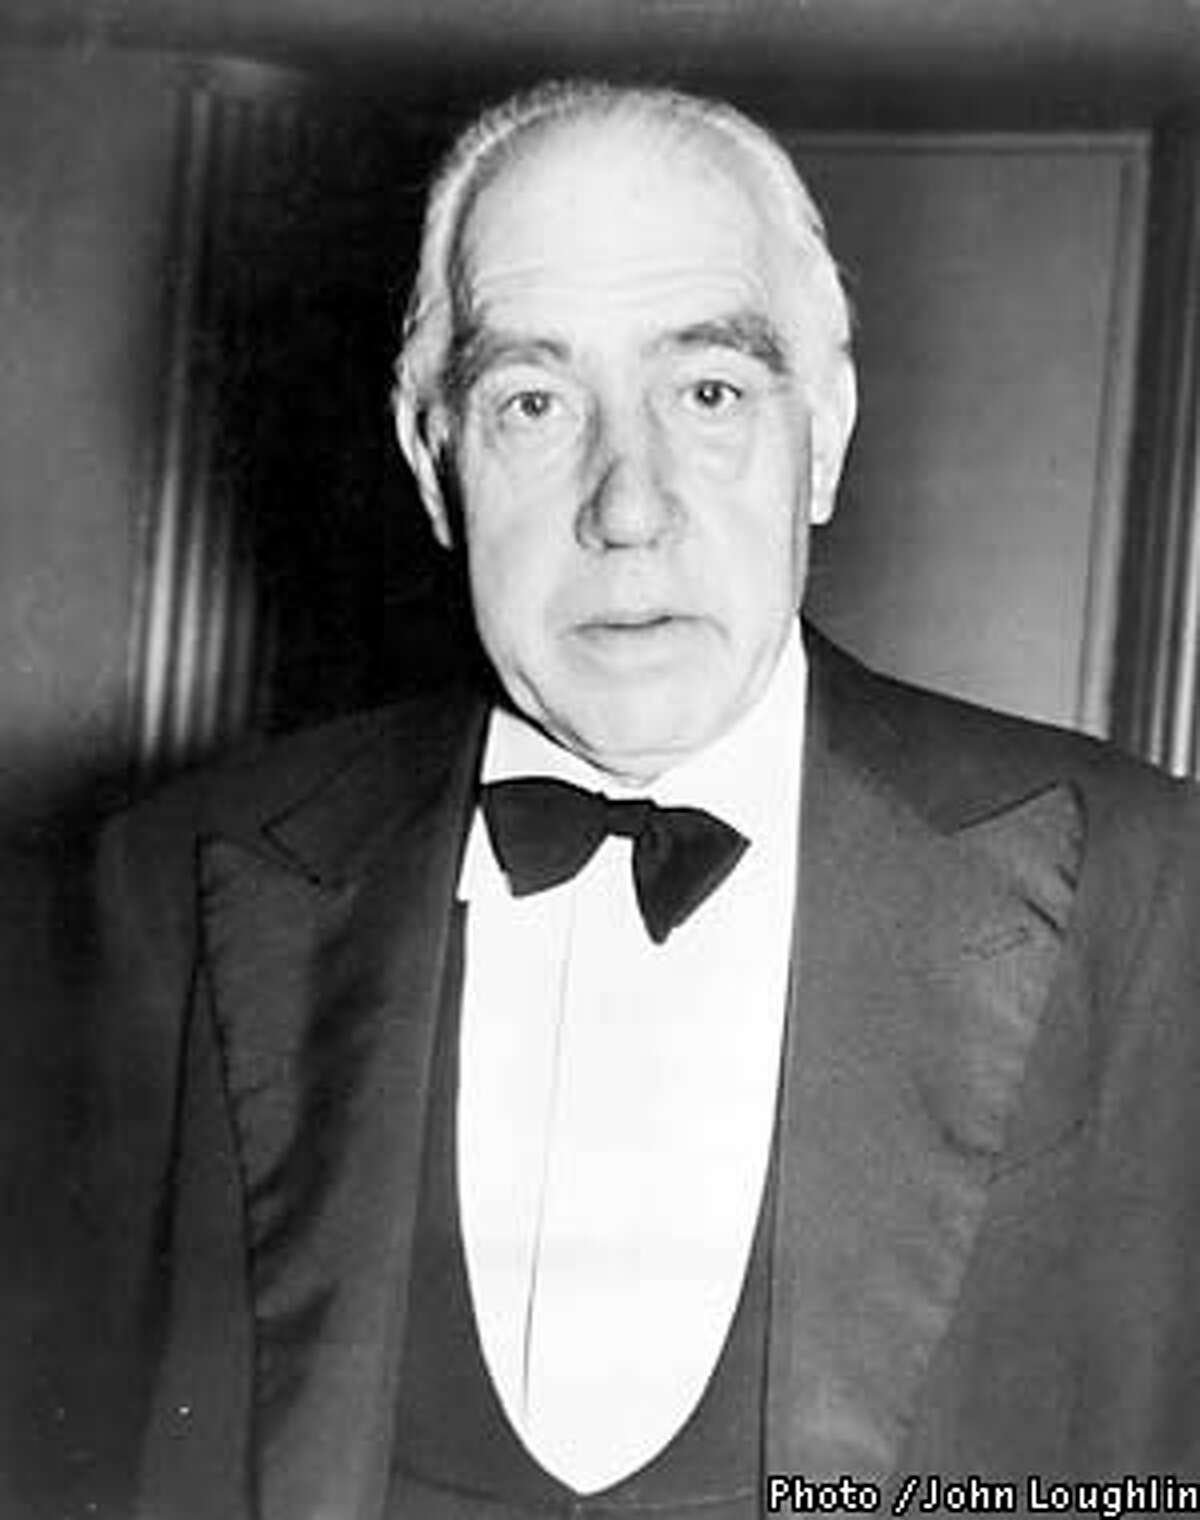 PROFESSOR NIELS BOHR, DANISH ATOMIC PHYSICIST AND TEACHER HAS BEEN NAMD AS RECIPIENT OF THE FIRST $75,000 ATOMS FOR PEACE AWARD, MARCH 12, 1957. PHOTO BY JOHN LOUGHLIN